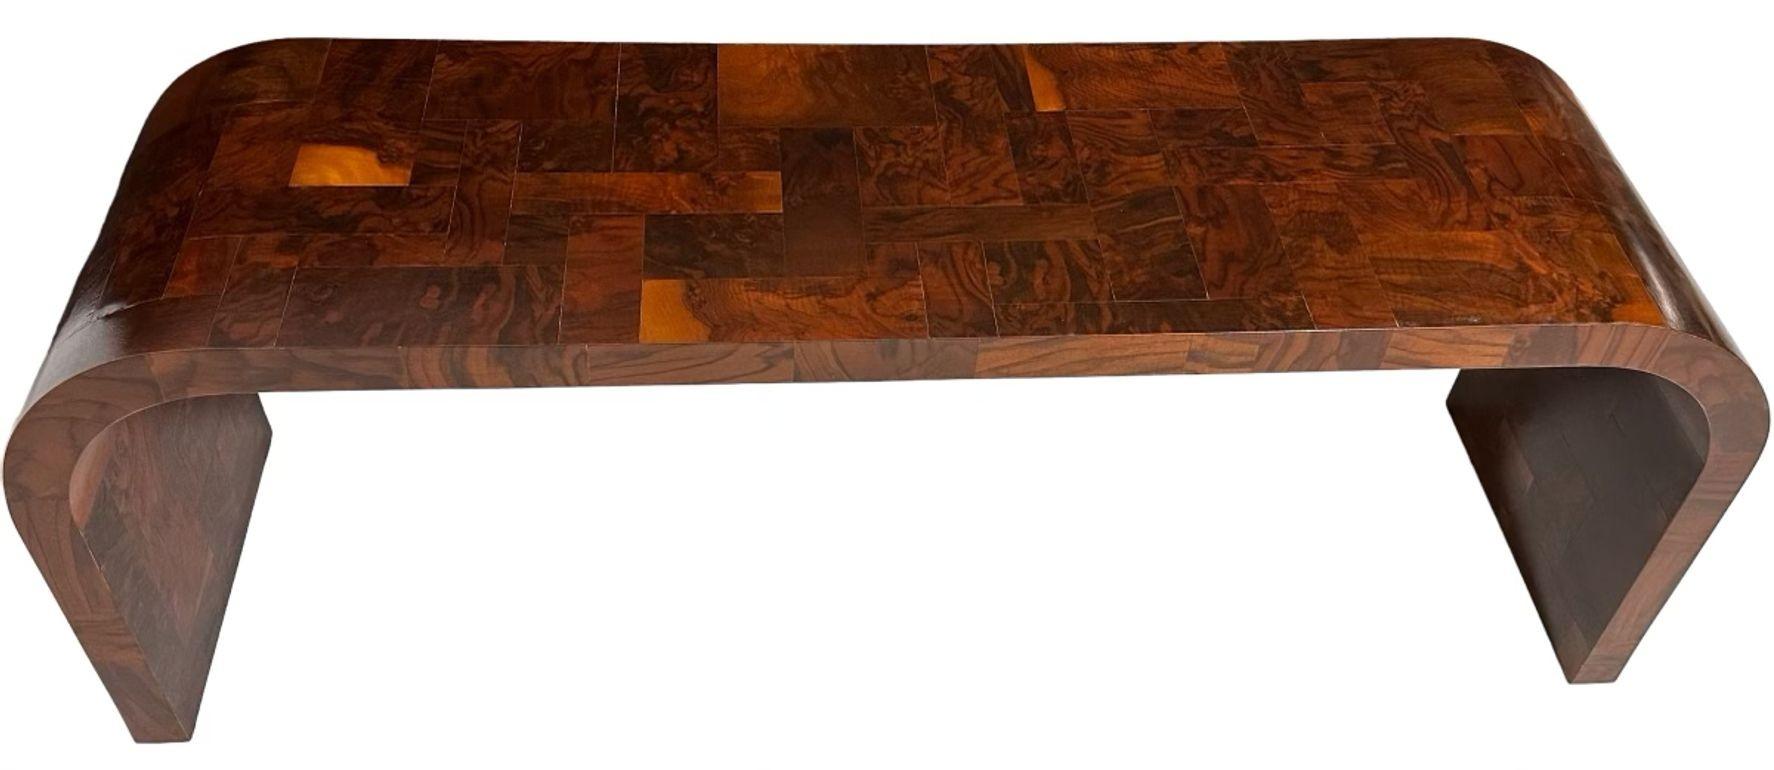 Mid-Century Modern Paul Evans Burl Patchwork Waterfall Cityscape Console Table, 1970 For Sale